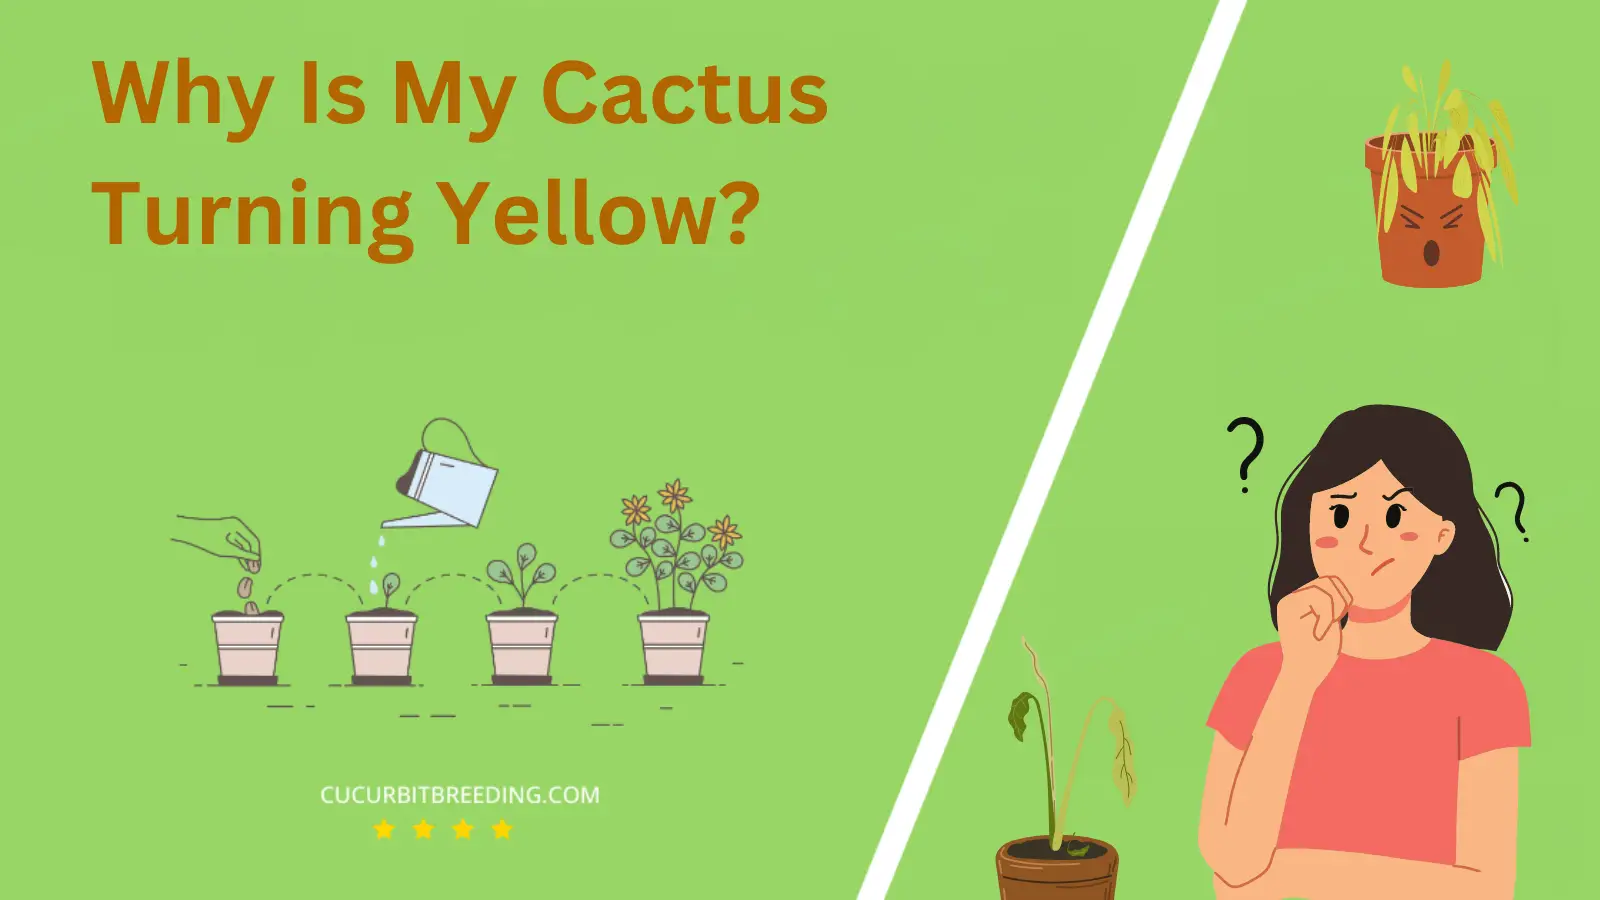 Why Is My Cactus Turning Yellow